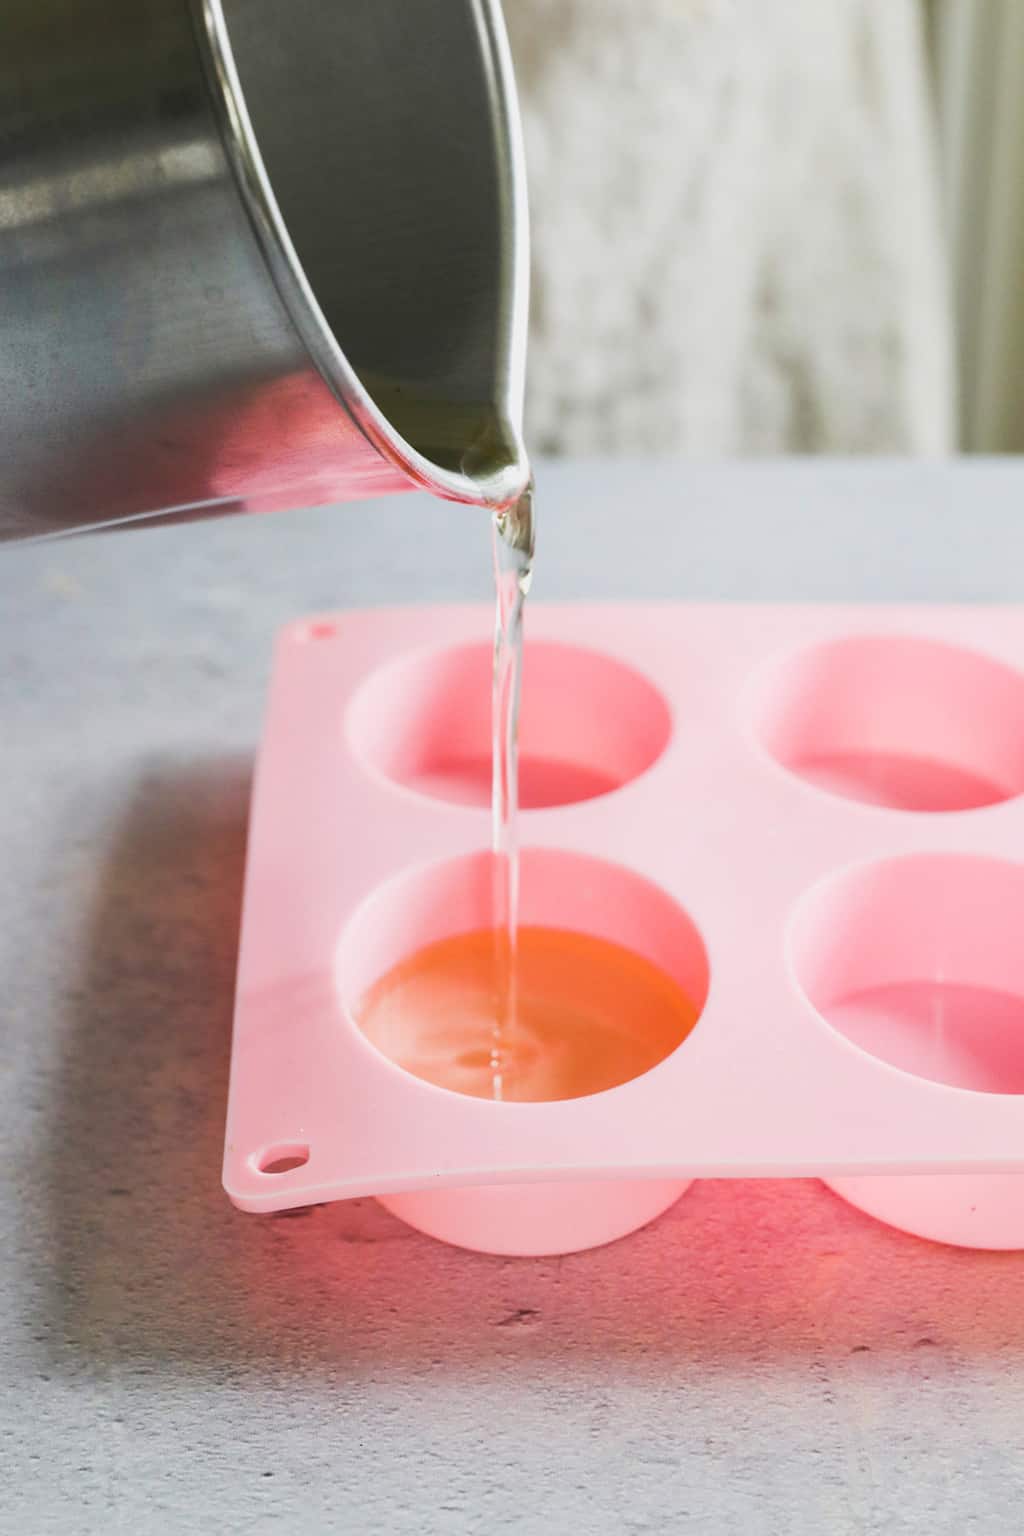 Pour wax into molds